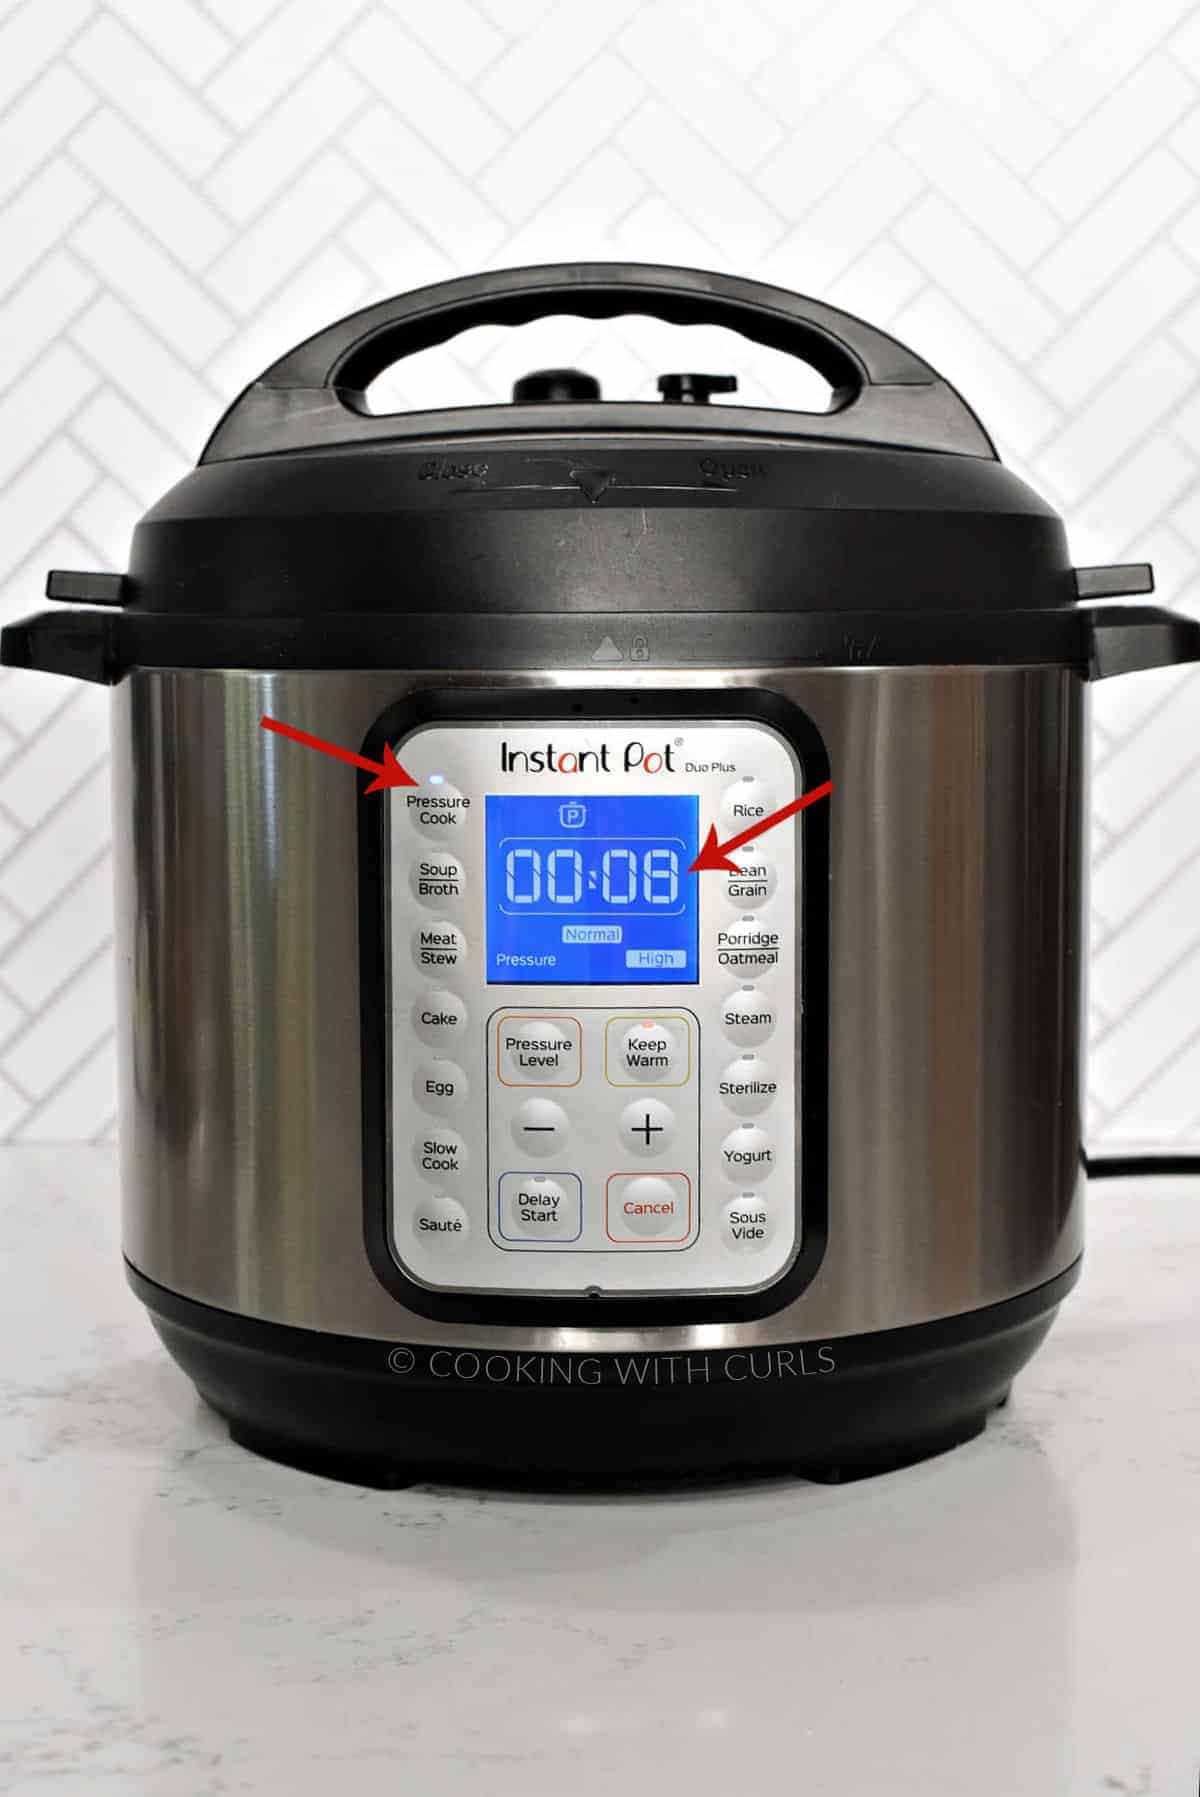 Instant Pot set to 8 minutes on Pressure Cook at High Pressure. 